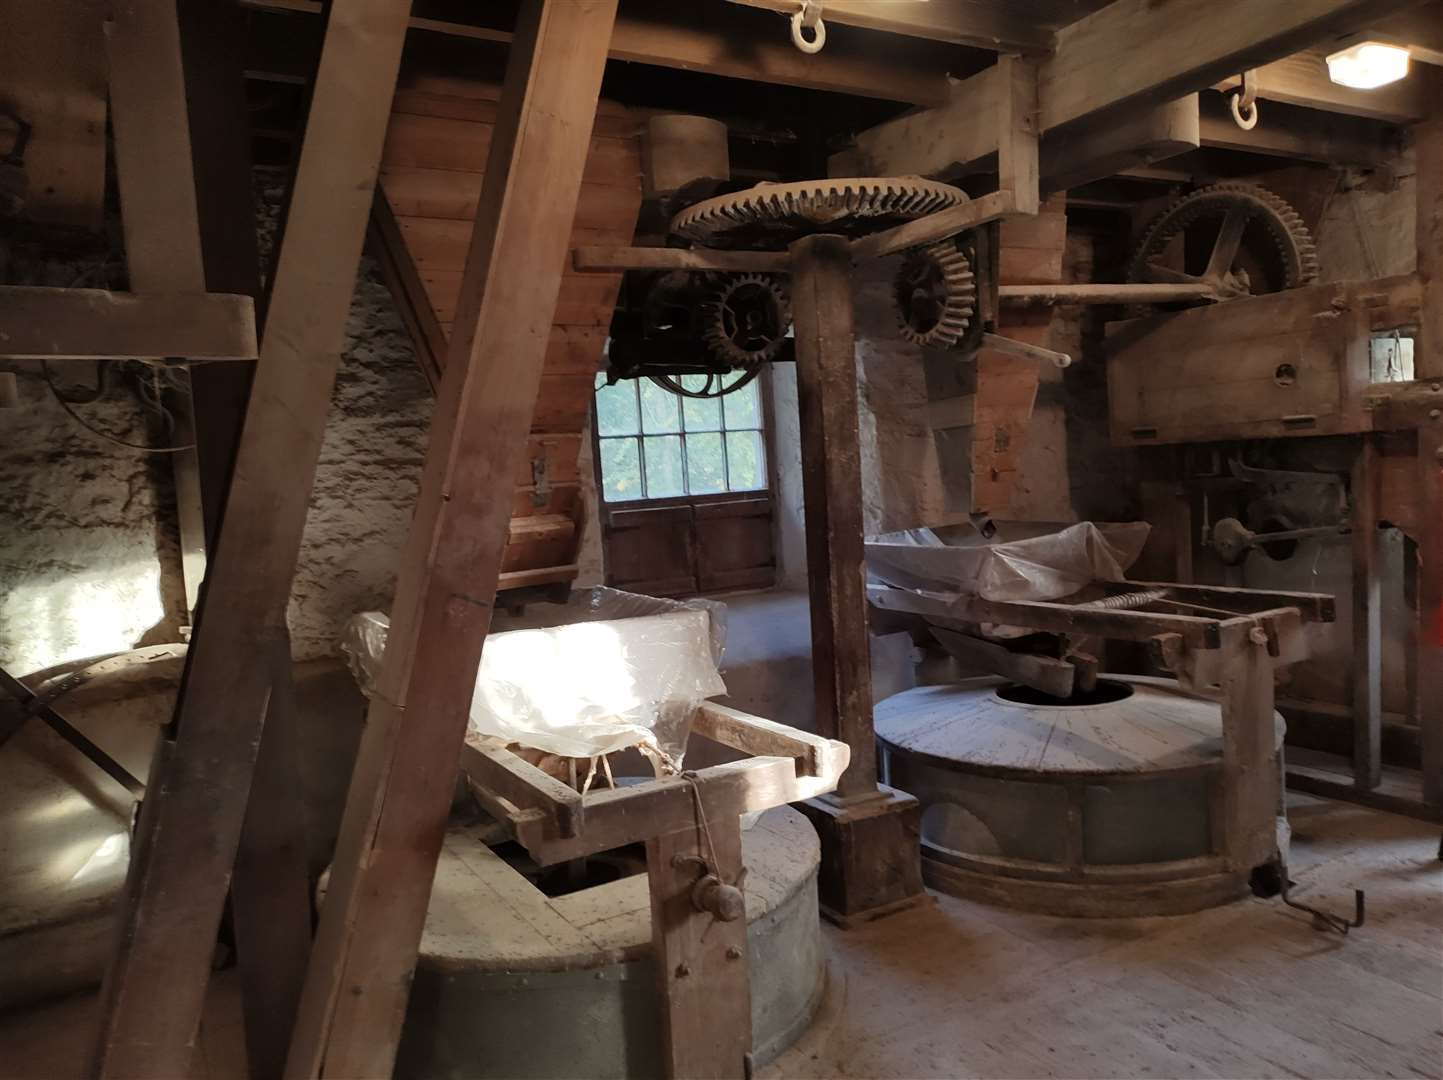 The mill produced a range of artisan flours and meals.